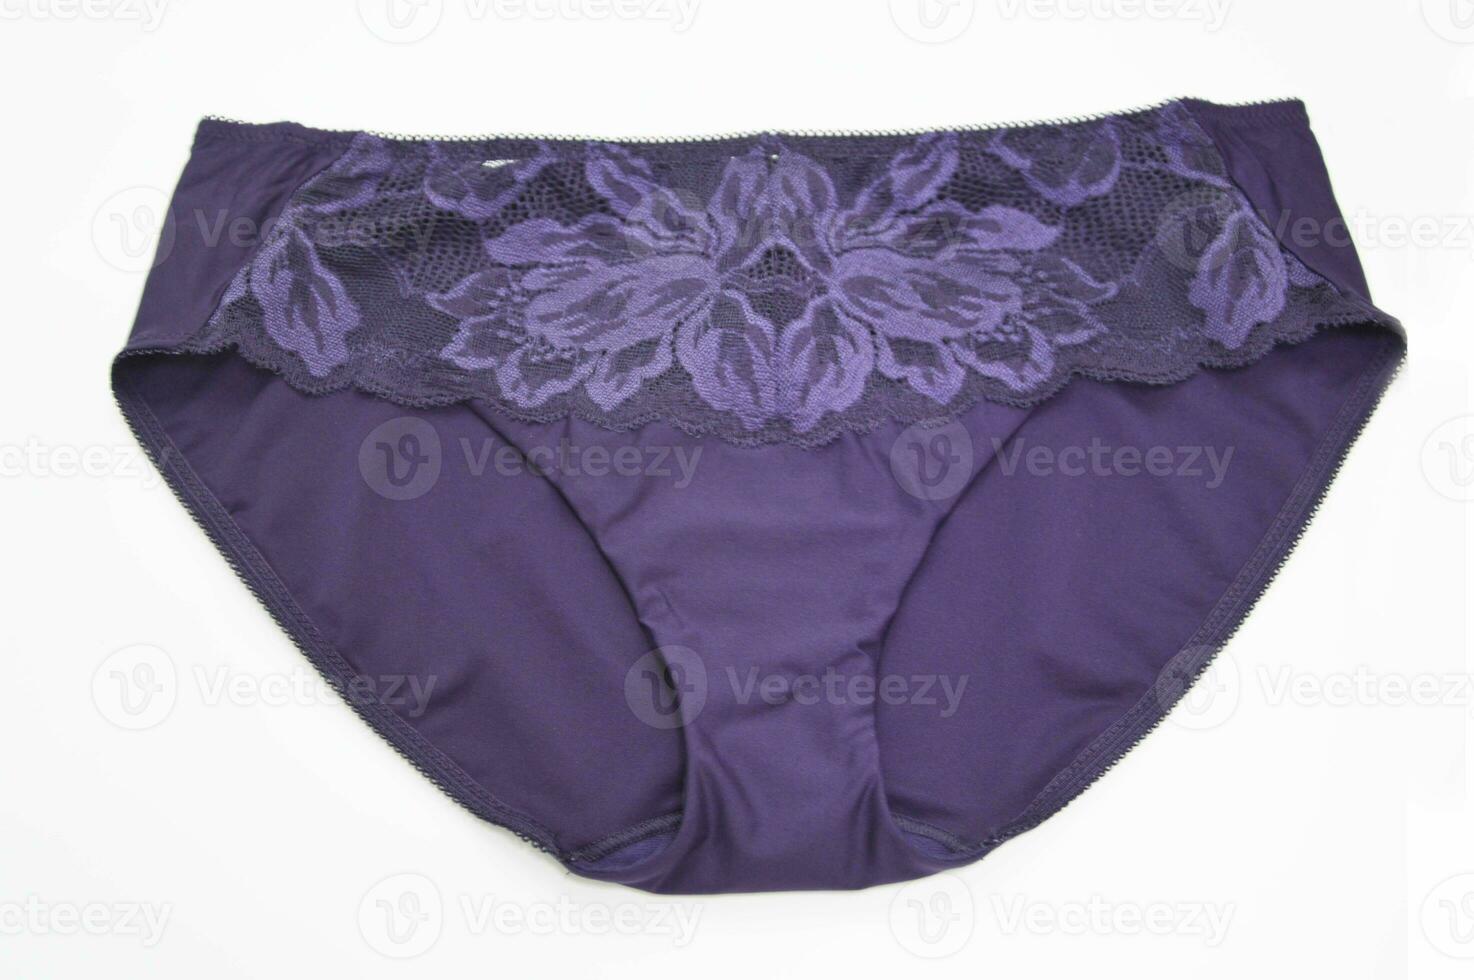 Lingerie. Top view of women's purple lilac lace panties on a white